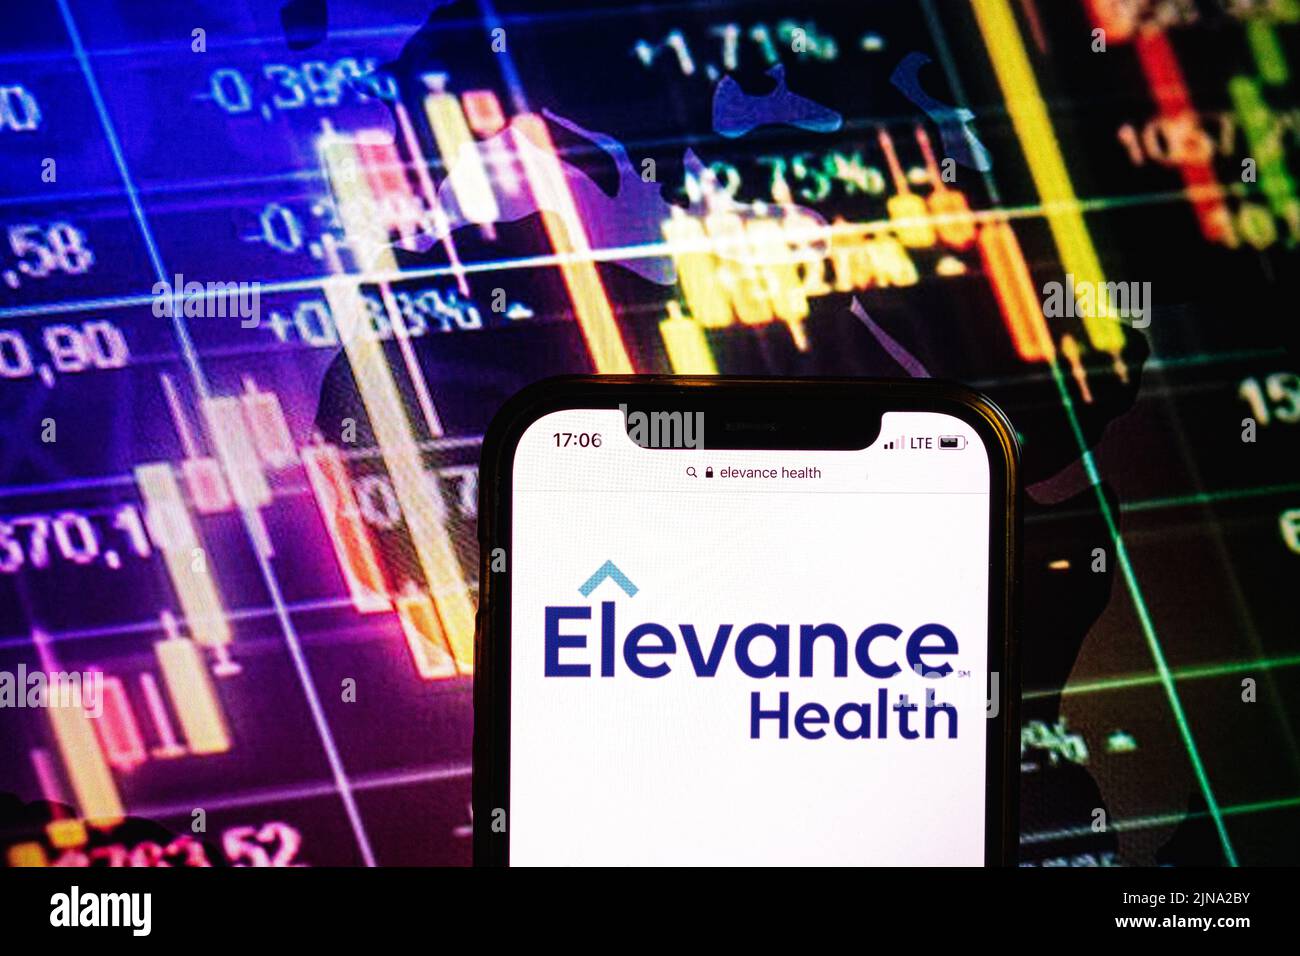 KONSKIE, POLAND - August 09, 2022: Smartphone displaying logo of Elevance Health company on stock exchange diagram background Stock Photo